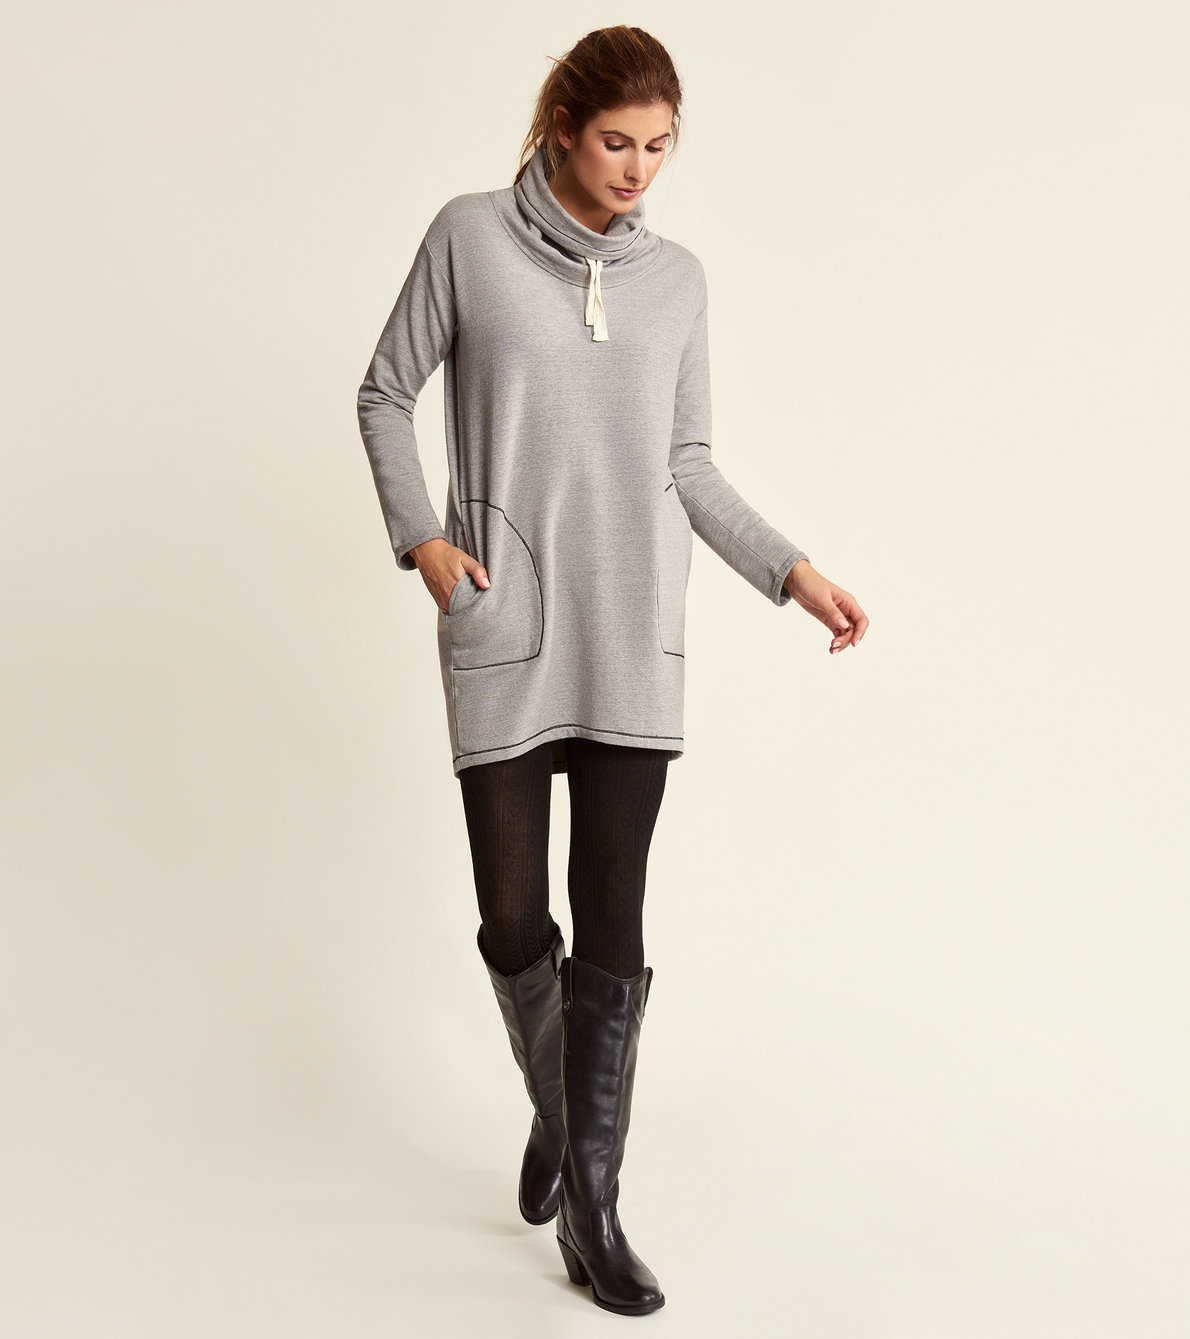 View larger image of Funnel Neck Tunic - Salt and Pepper Charcoal